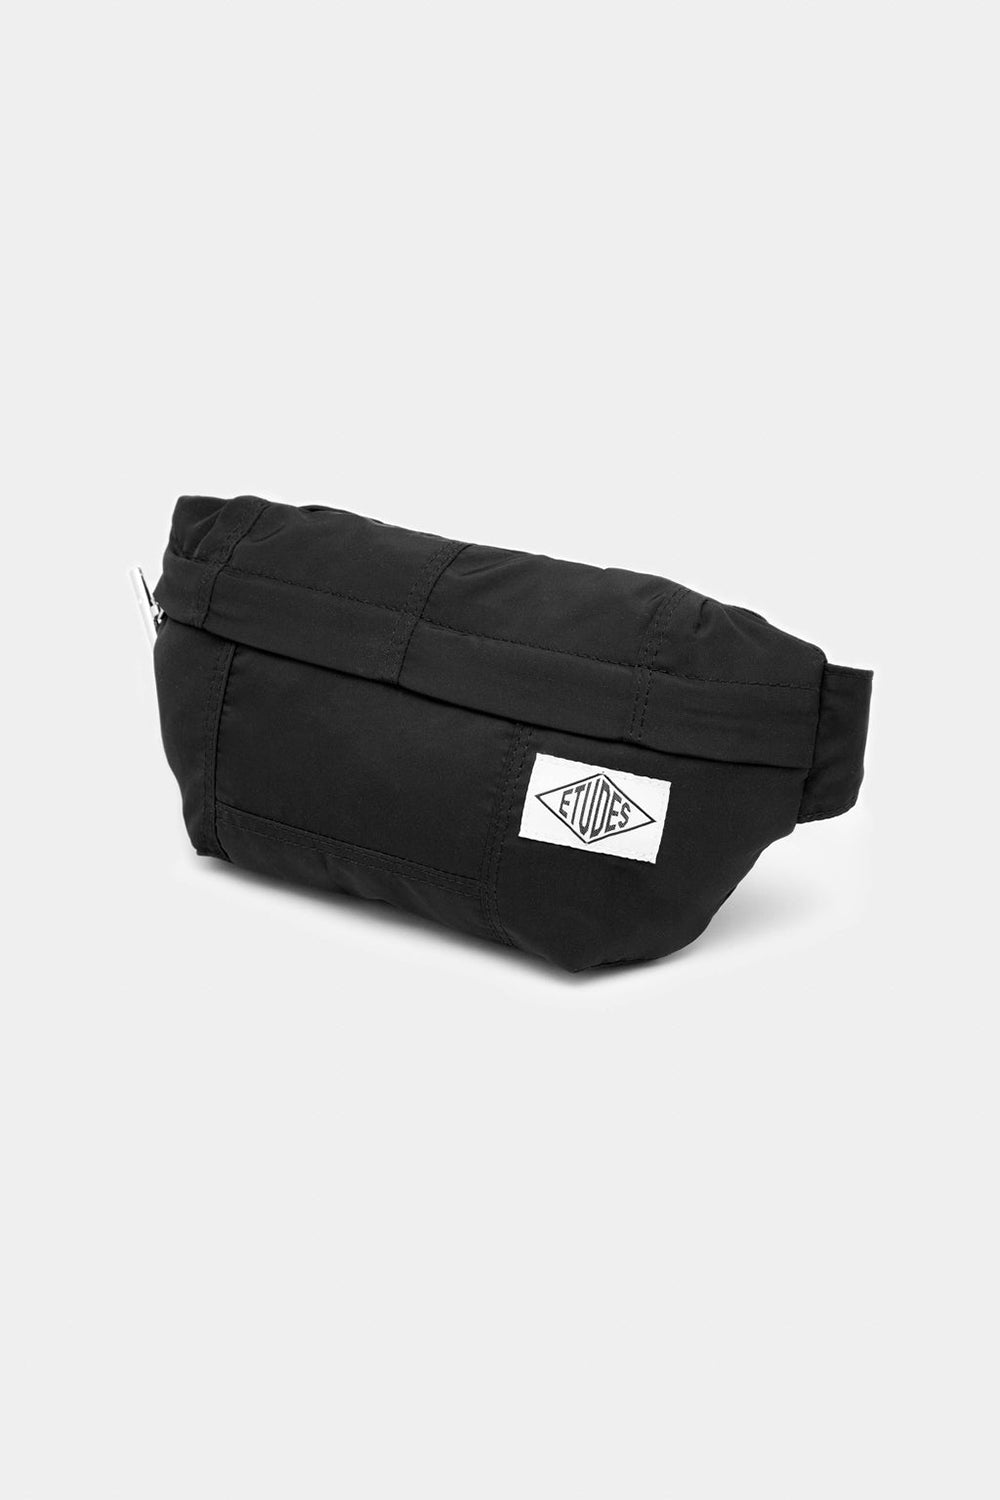 Mens Fashion Bags | Etudes Fanny Pack | The Standard Store